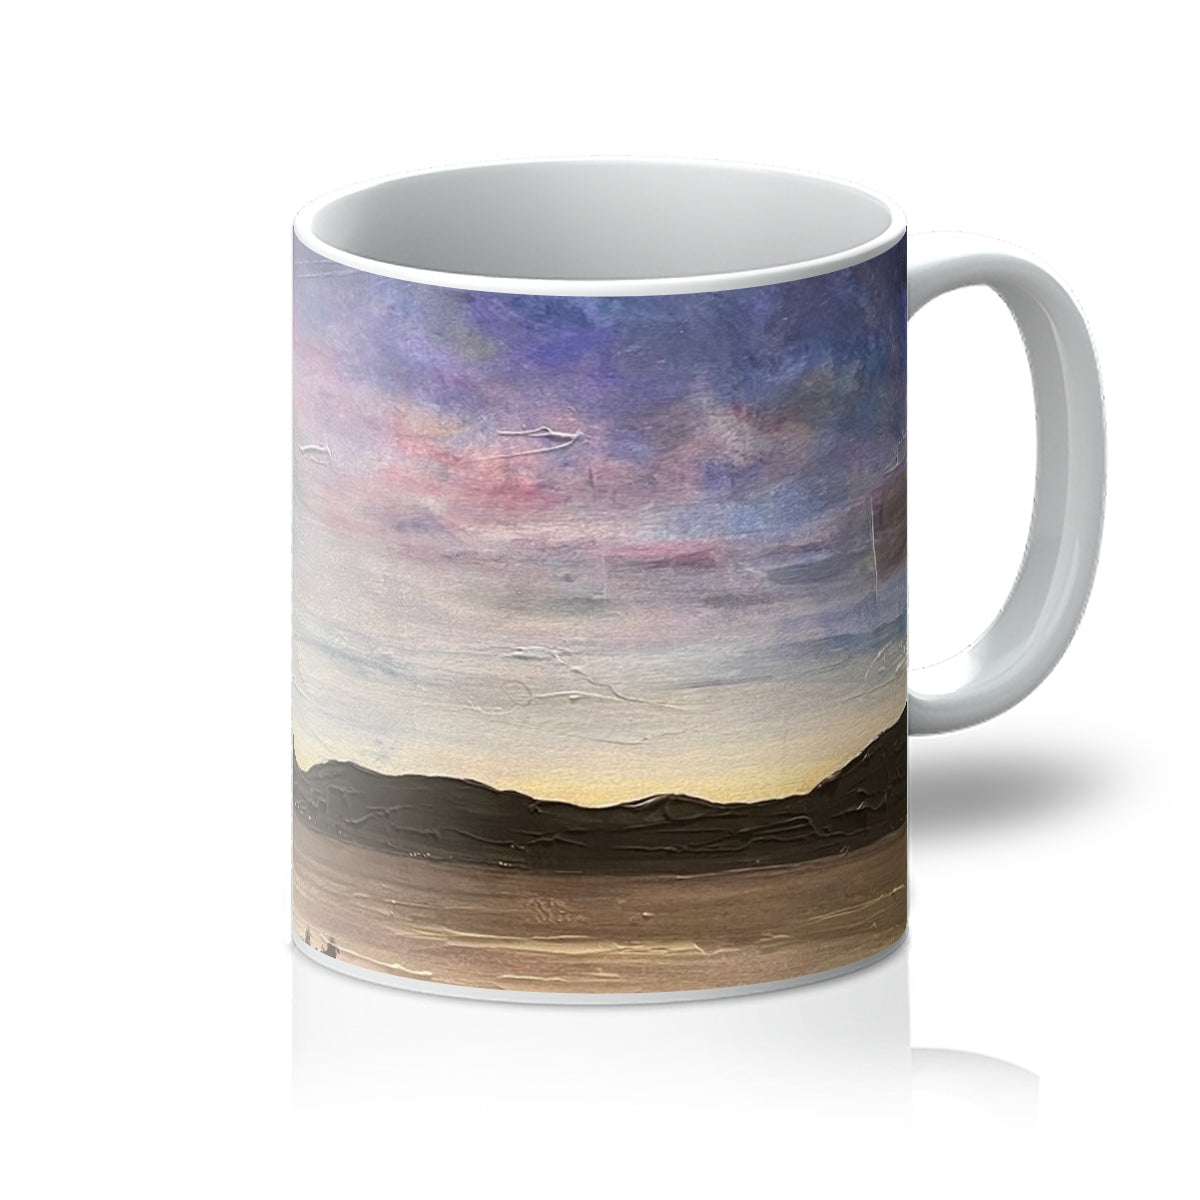 River Clyde Twilight Art Gifts Mug-Mugs-River Clyde Art Gallery-11oz-White-Paintings, Prints, Homeware, Art Gifts From Scotland By Scottish Artist Kevin Hunter